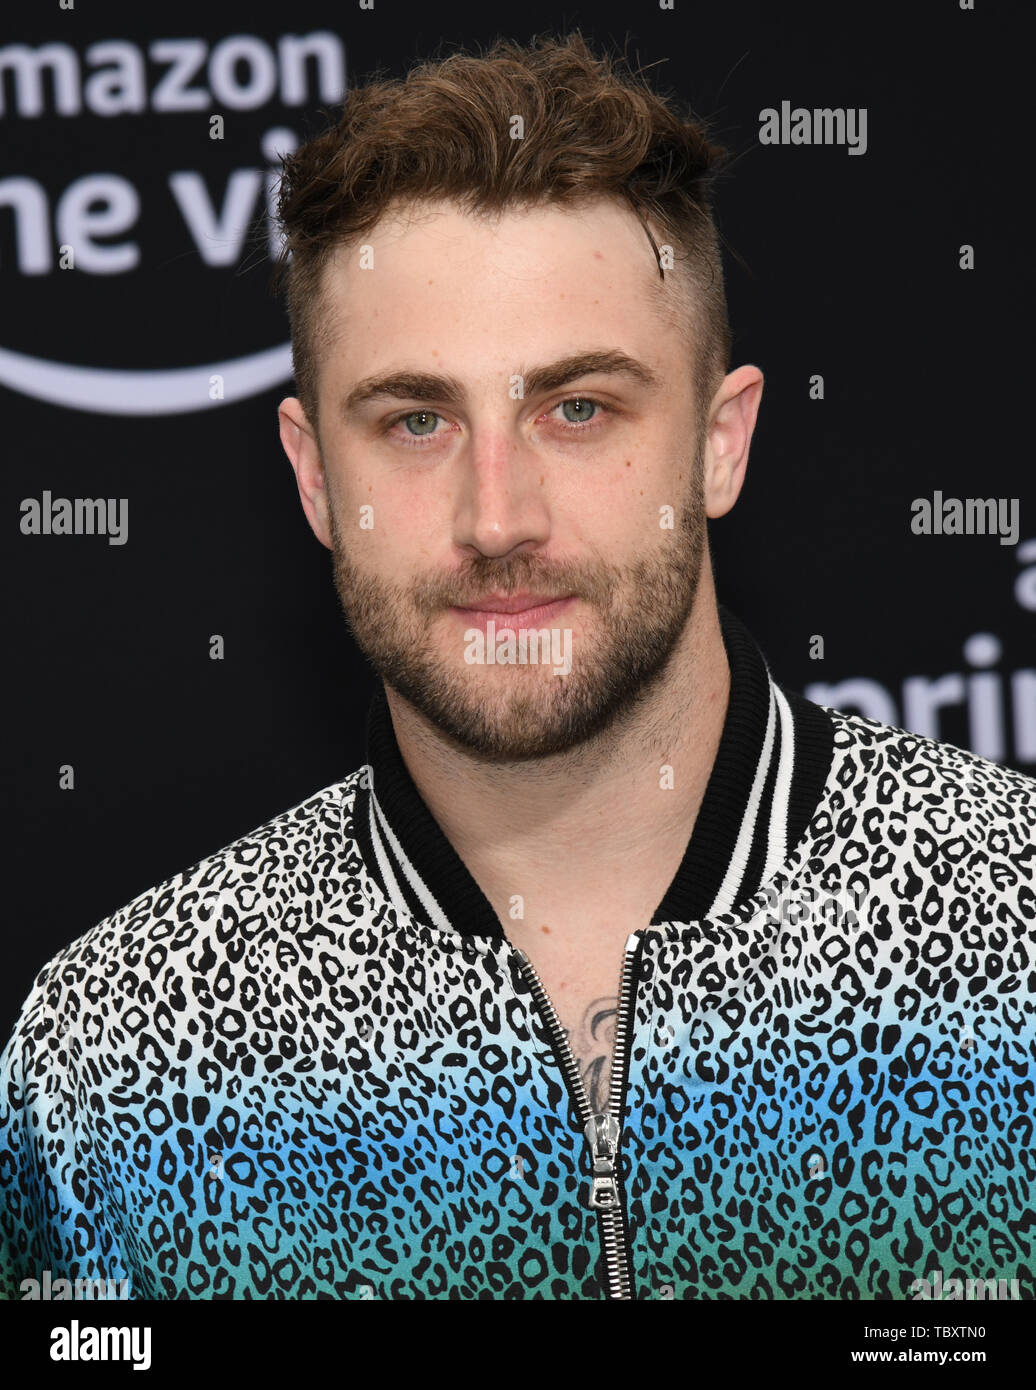 June 3, 2019 - Westwood, California, USA - 02, June 2019 - Westwood Village, California. Jordan McGraw attends Premiere Of Amazon Prime Video's 'Chasing Happiness' at the Regency Village Bruin Theatre. (Credit Image: © Billy Bennight/ZUMA Wire) Stock Photo